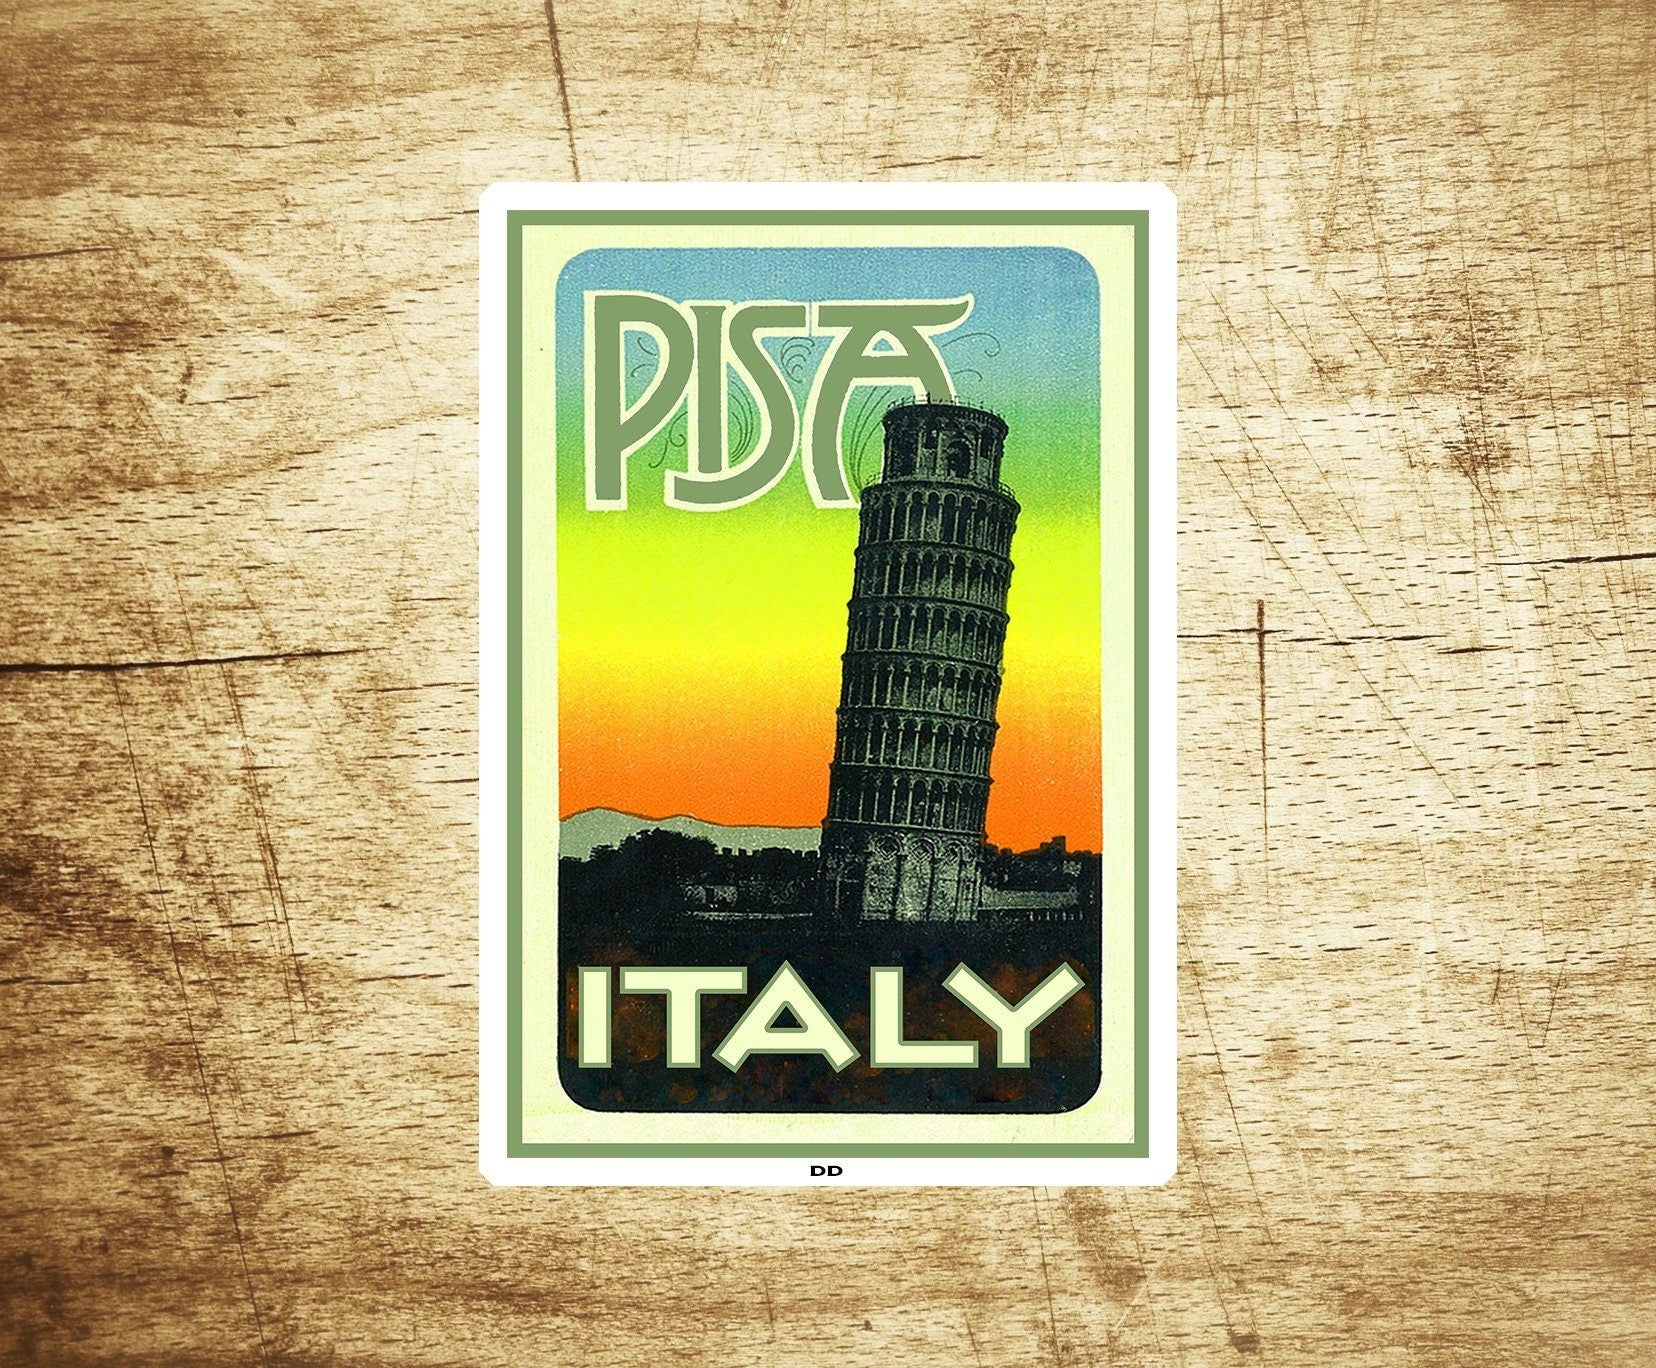 Pisa Italy Decal Sticker 3.75" x 2.55" Leaning Tower Vinyl